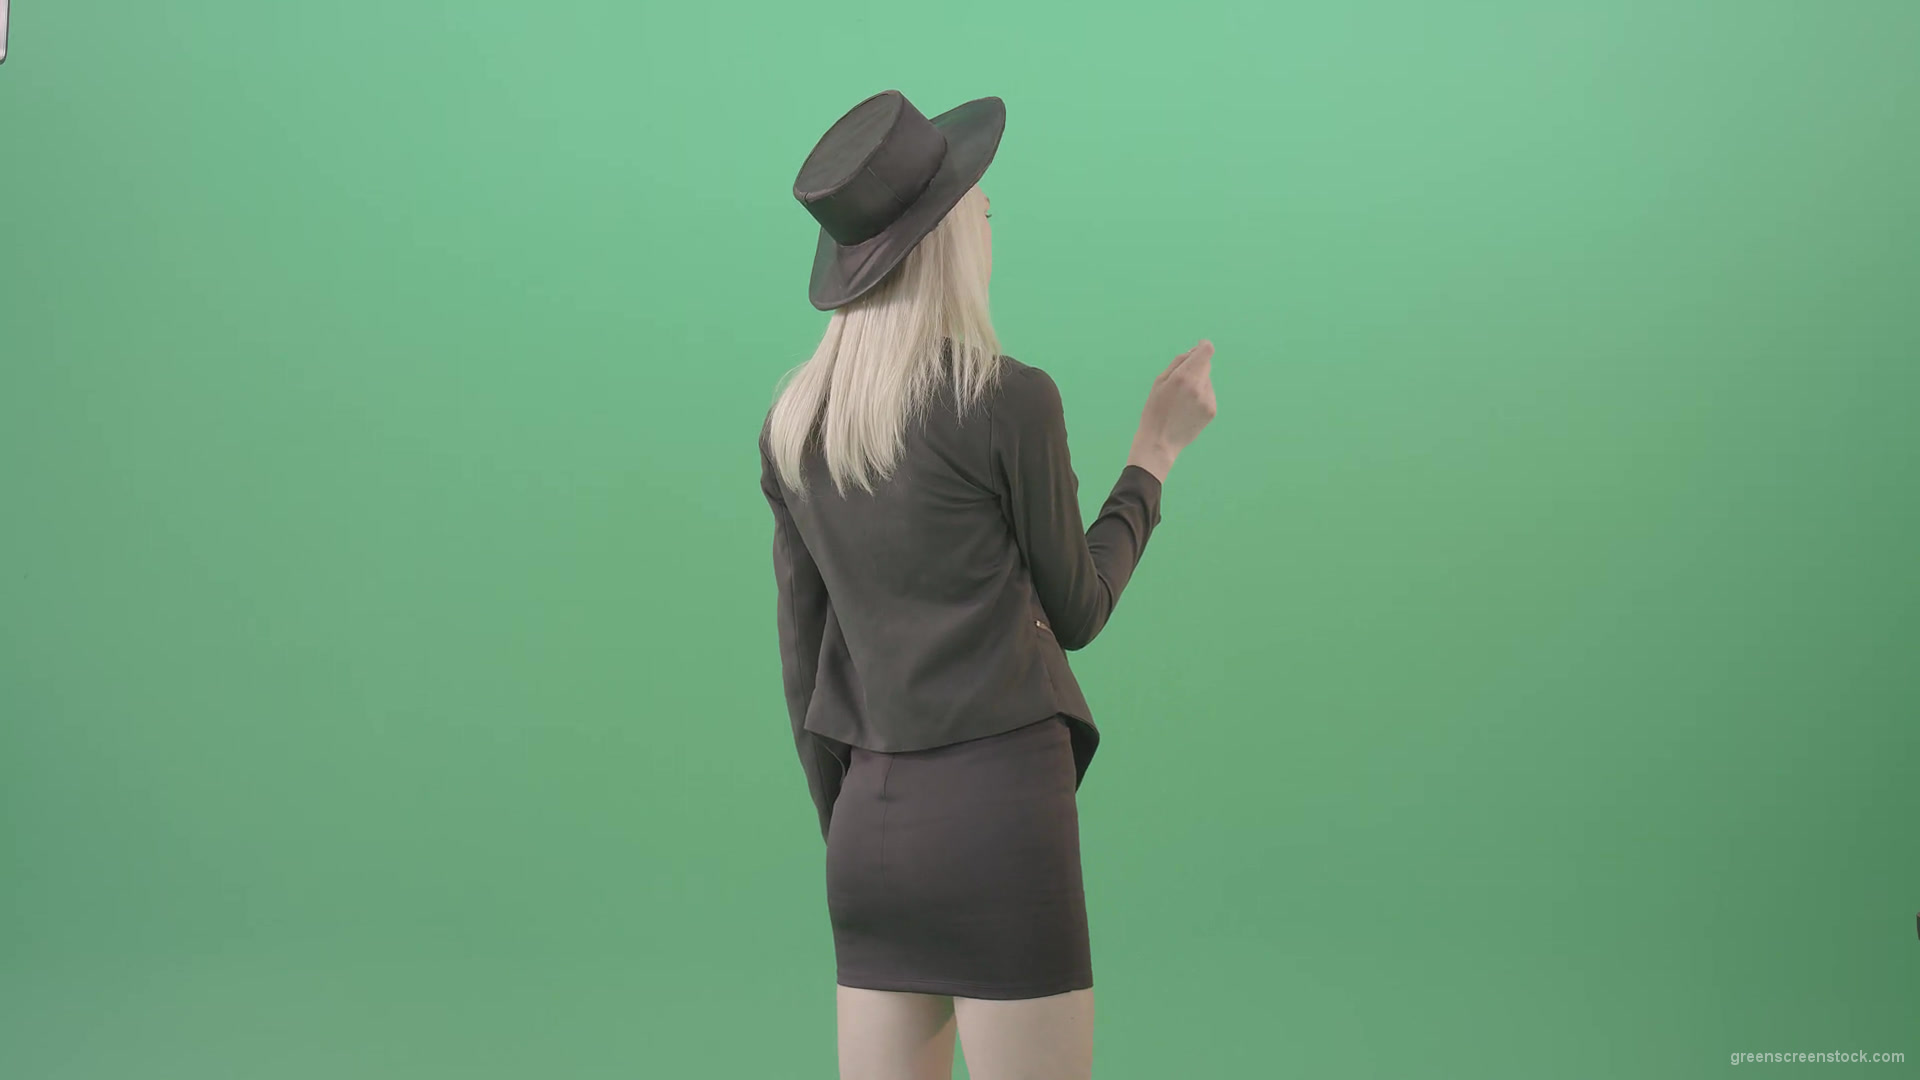 Blonde-Girl-looking-digital-virtual-products-on-touch-screen-from-back-side-4K-Green-Screen-Video-Footage-1920_006 Green Screen Stock